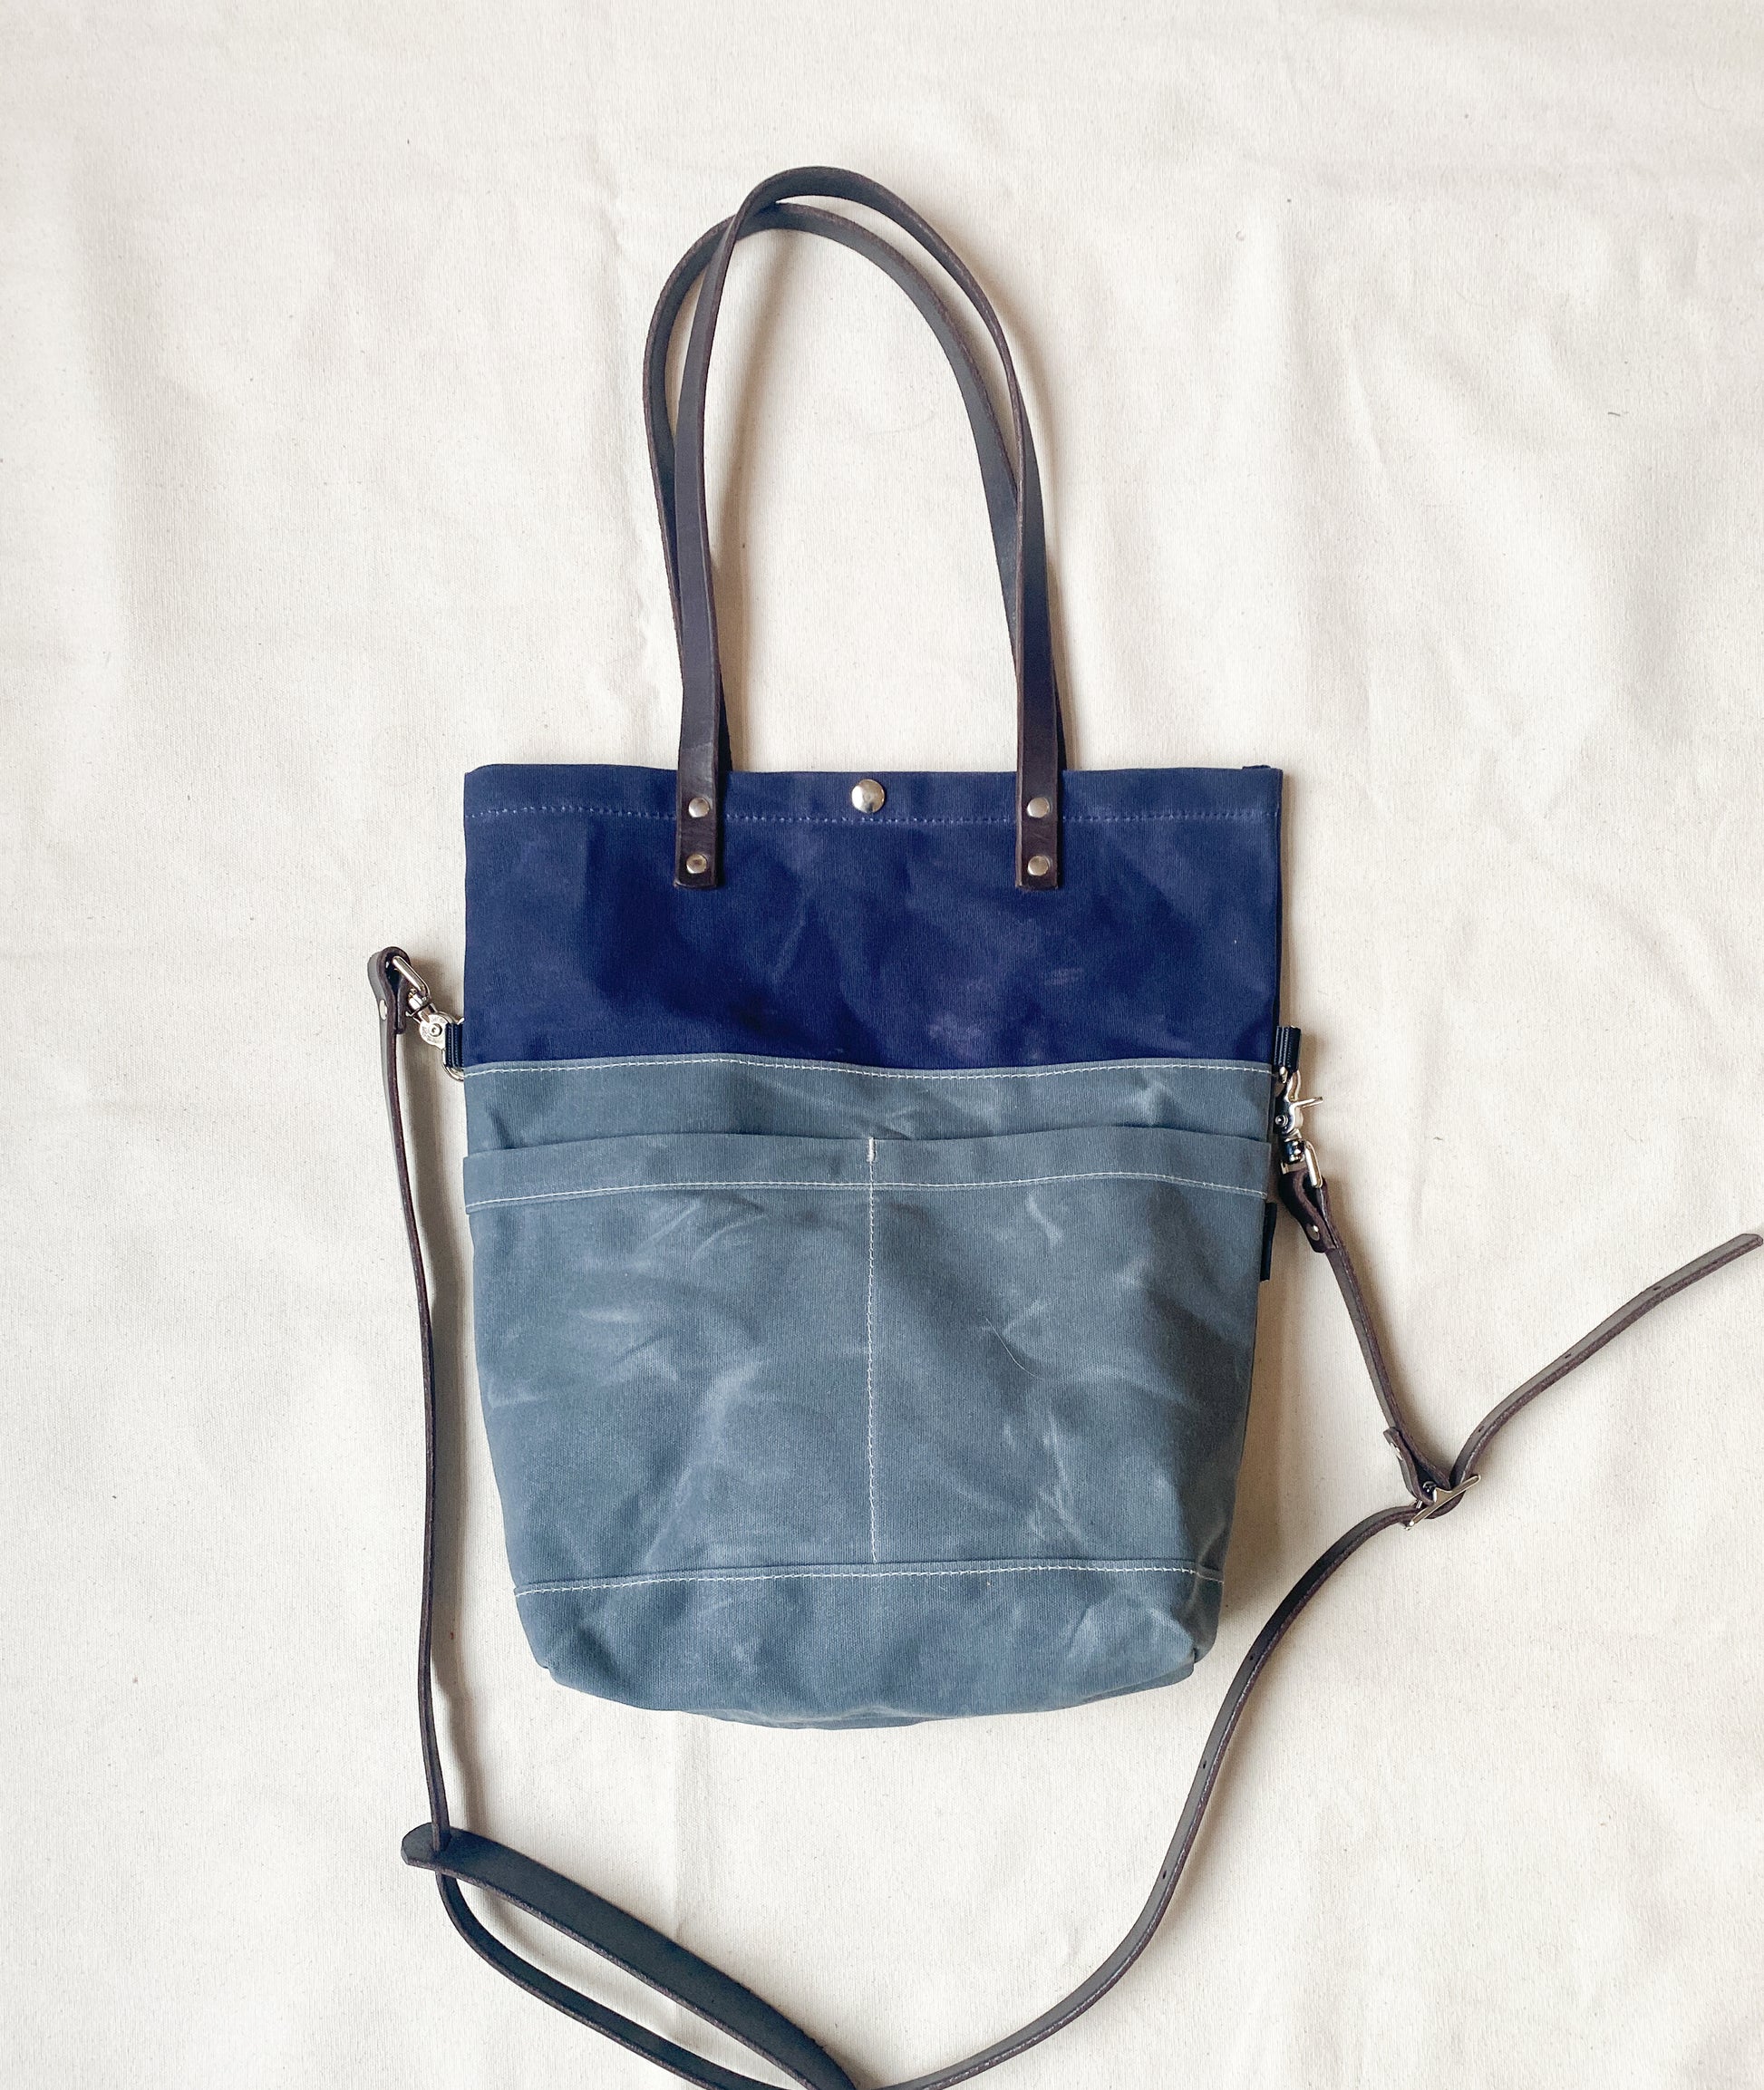 Convertible tote in slate and blue. 